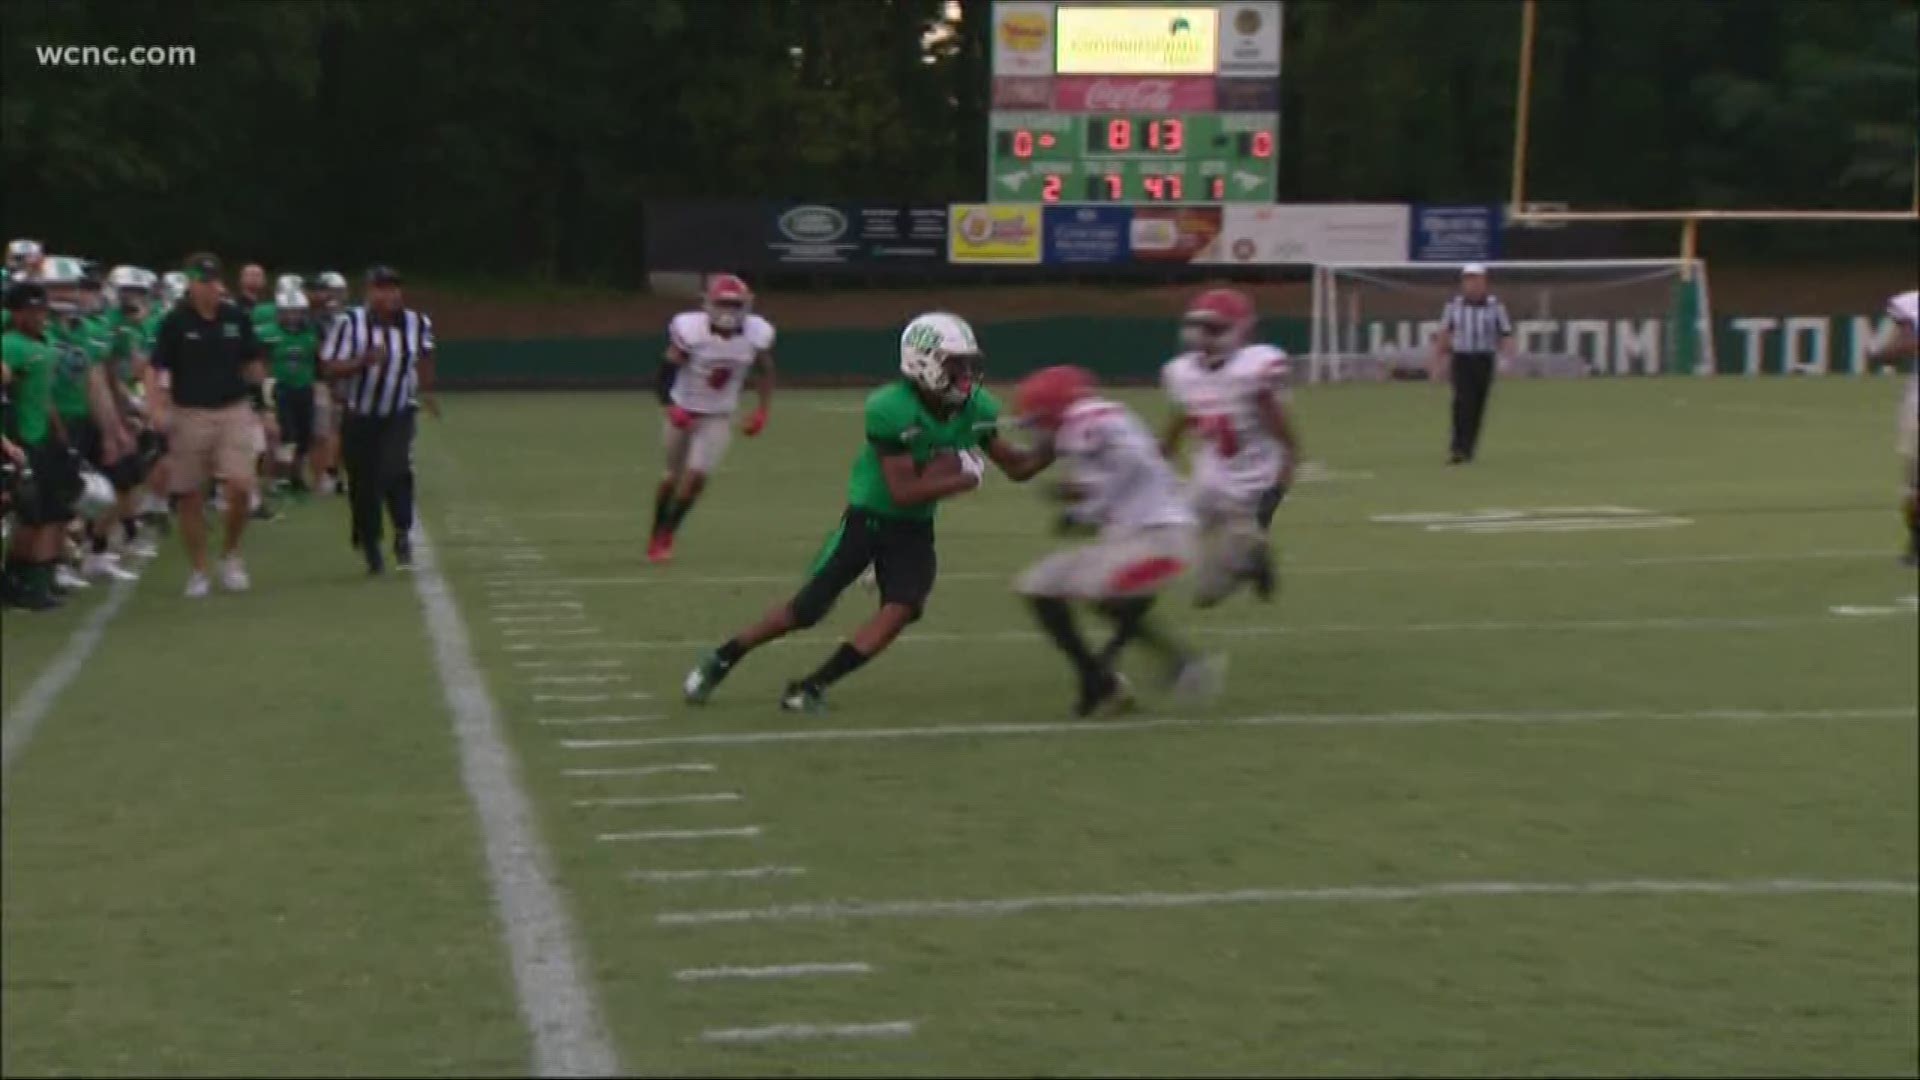 Myers Park rolls through South Meck 56-6.